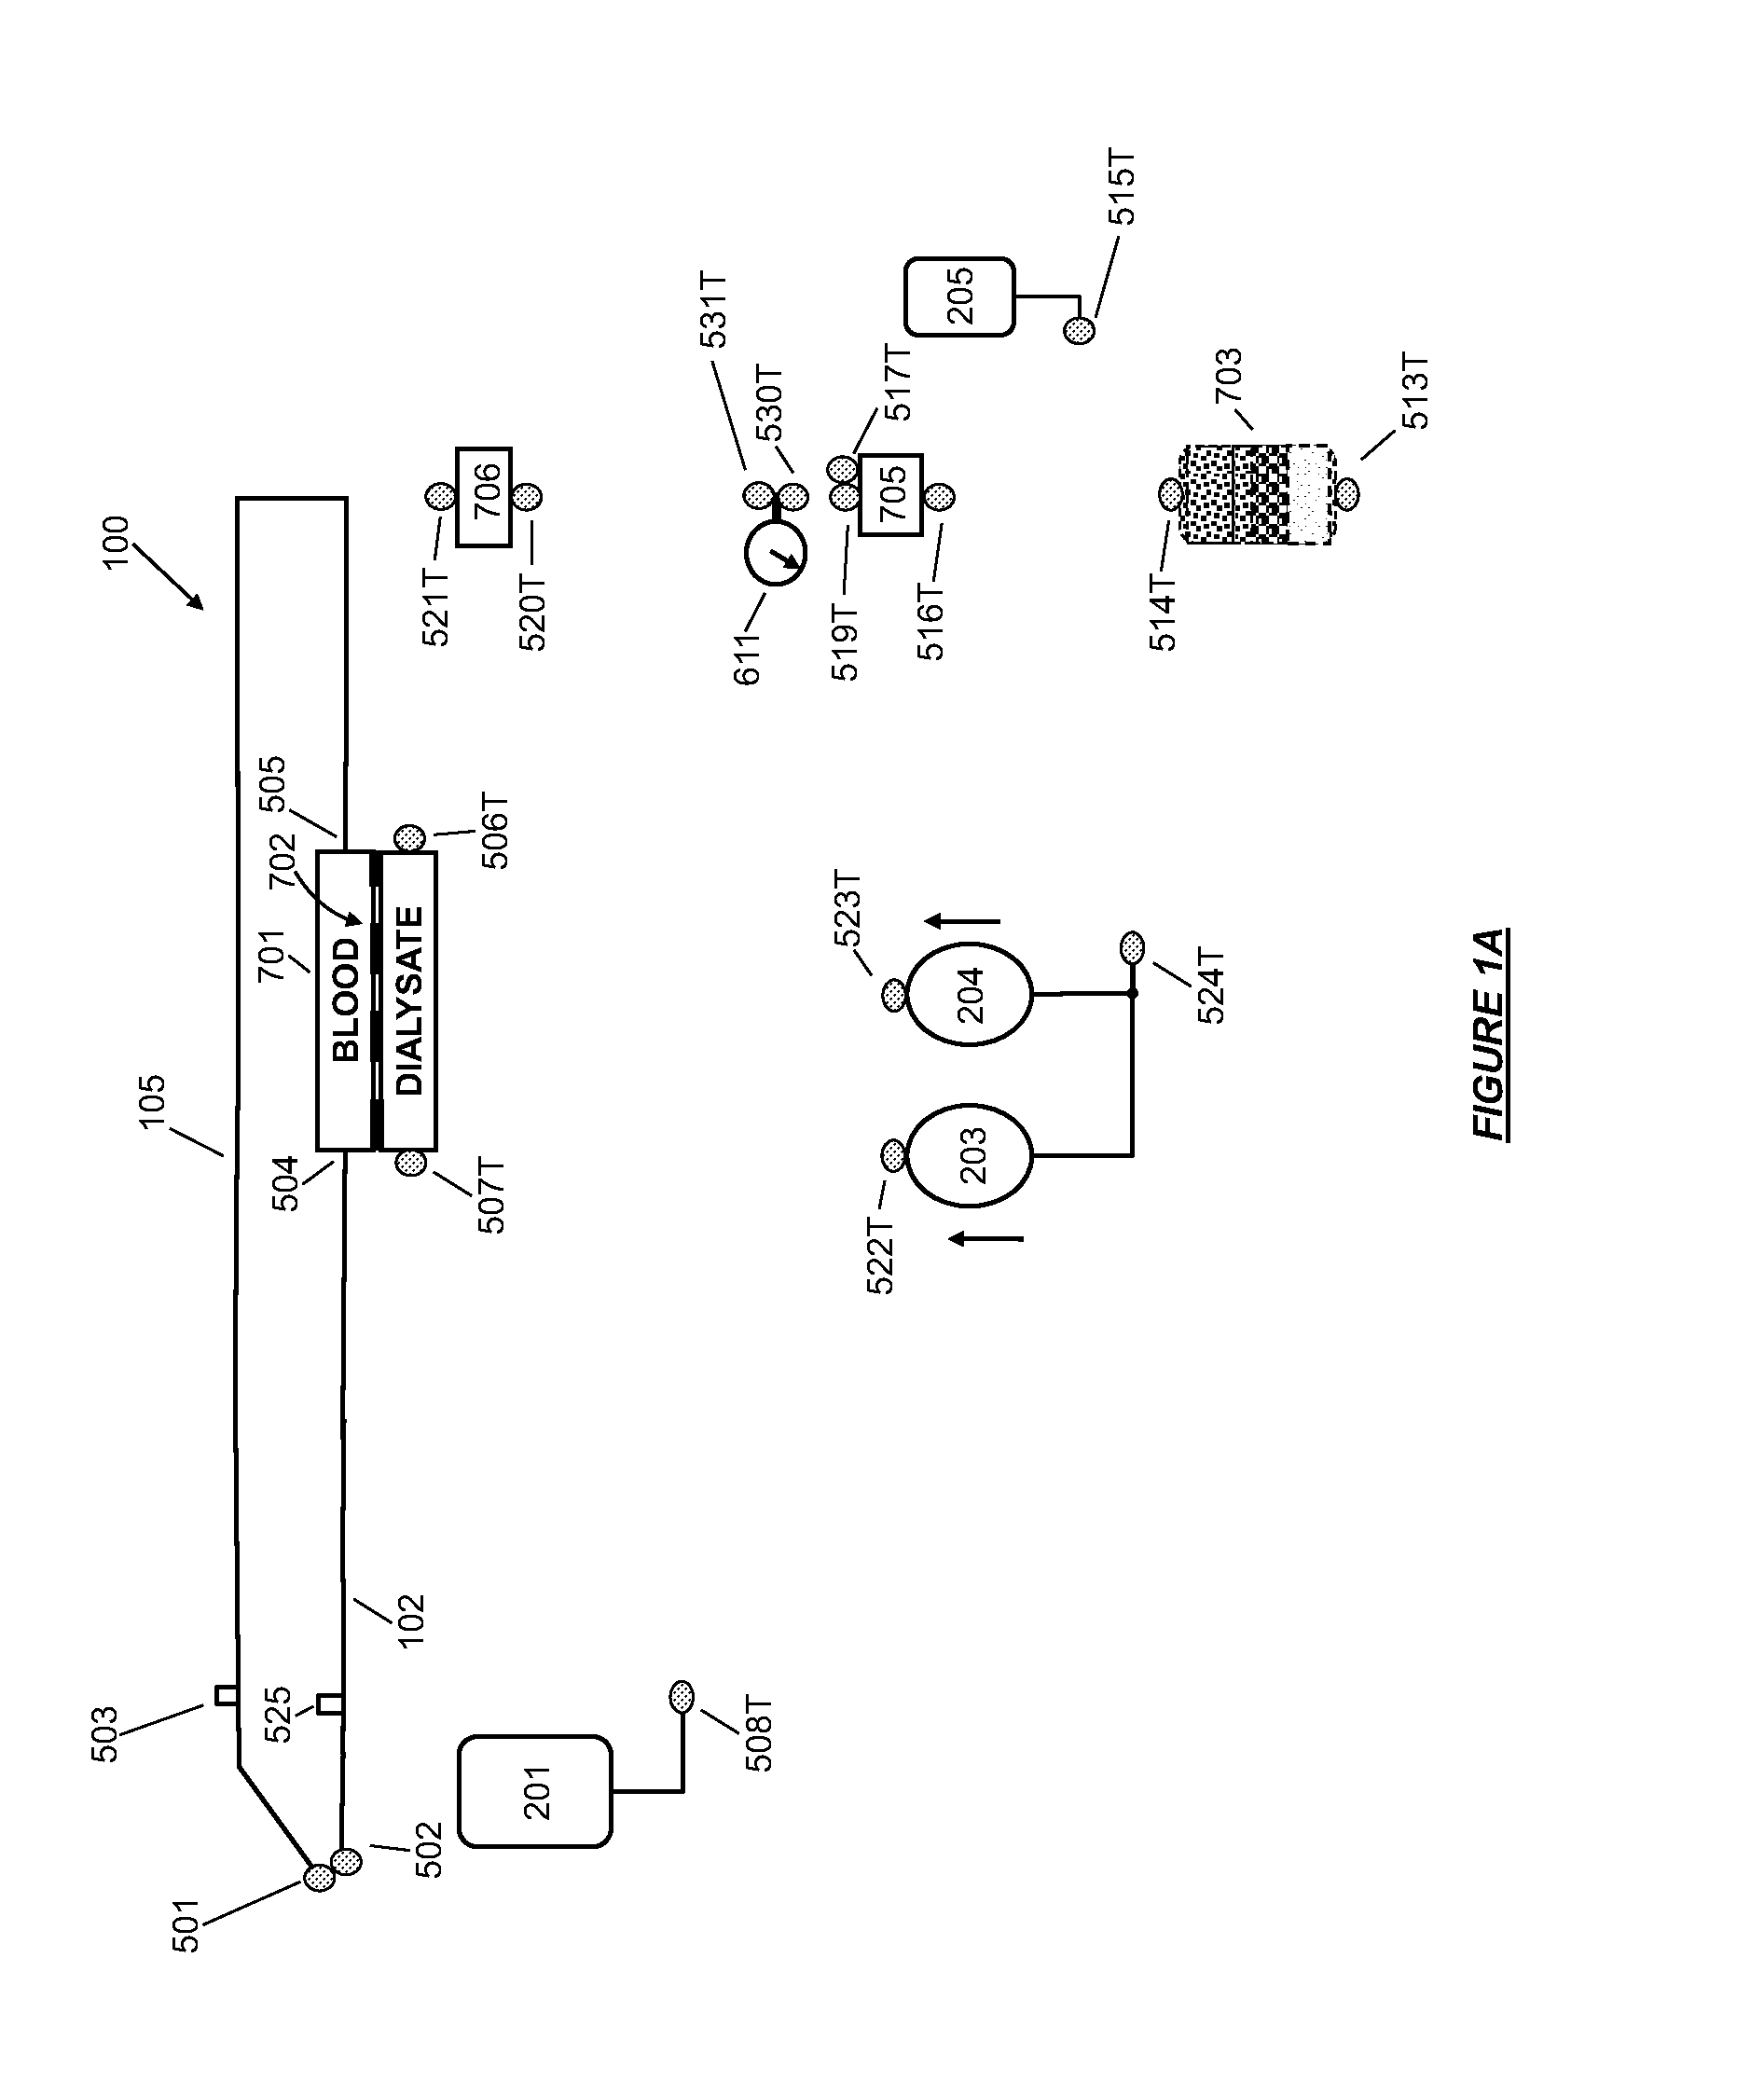 Modular fluid therapy system having jumpered flow paths and systems and methods for cleaning and disinfection